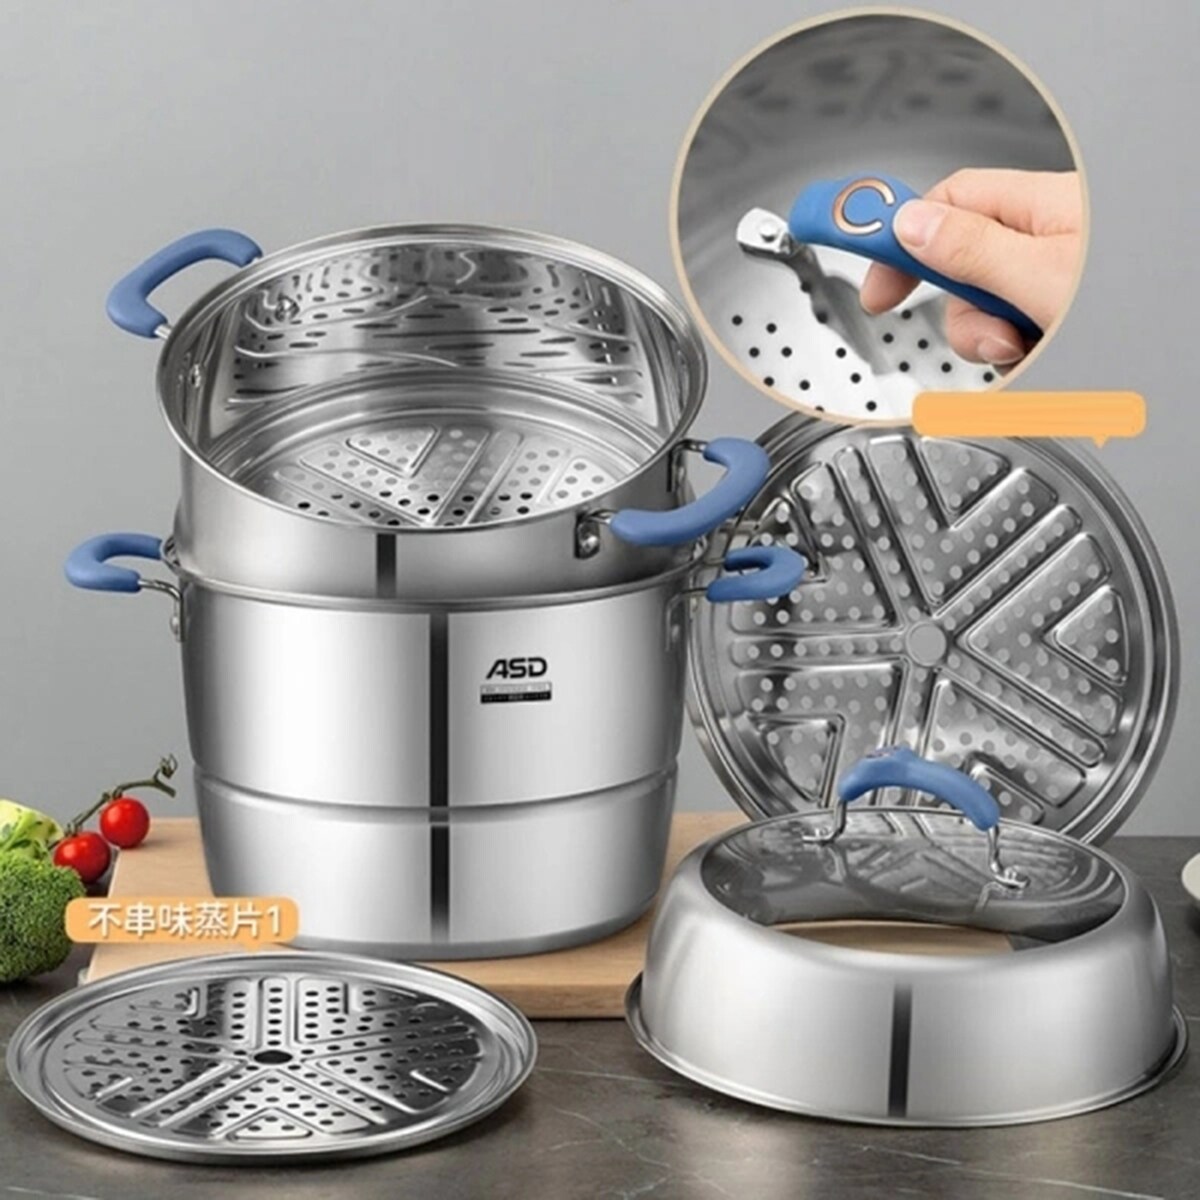 https://ak1.ostkcdn.com/images/products/is/images/direct/5bfae929956c26771cc651bd0f958689a9a2a1d2/Three-layer-Multi-bottom-Stainless-Steel-Steamer.jpg